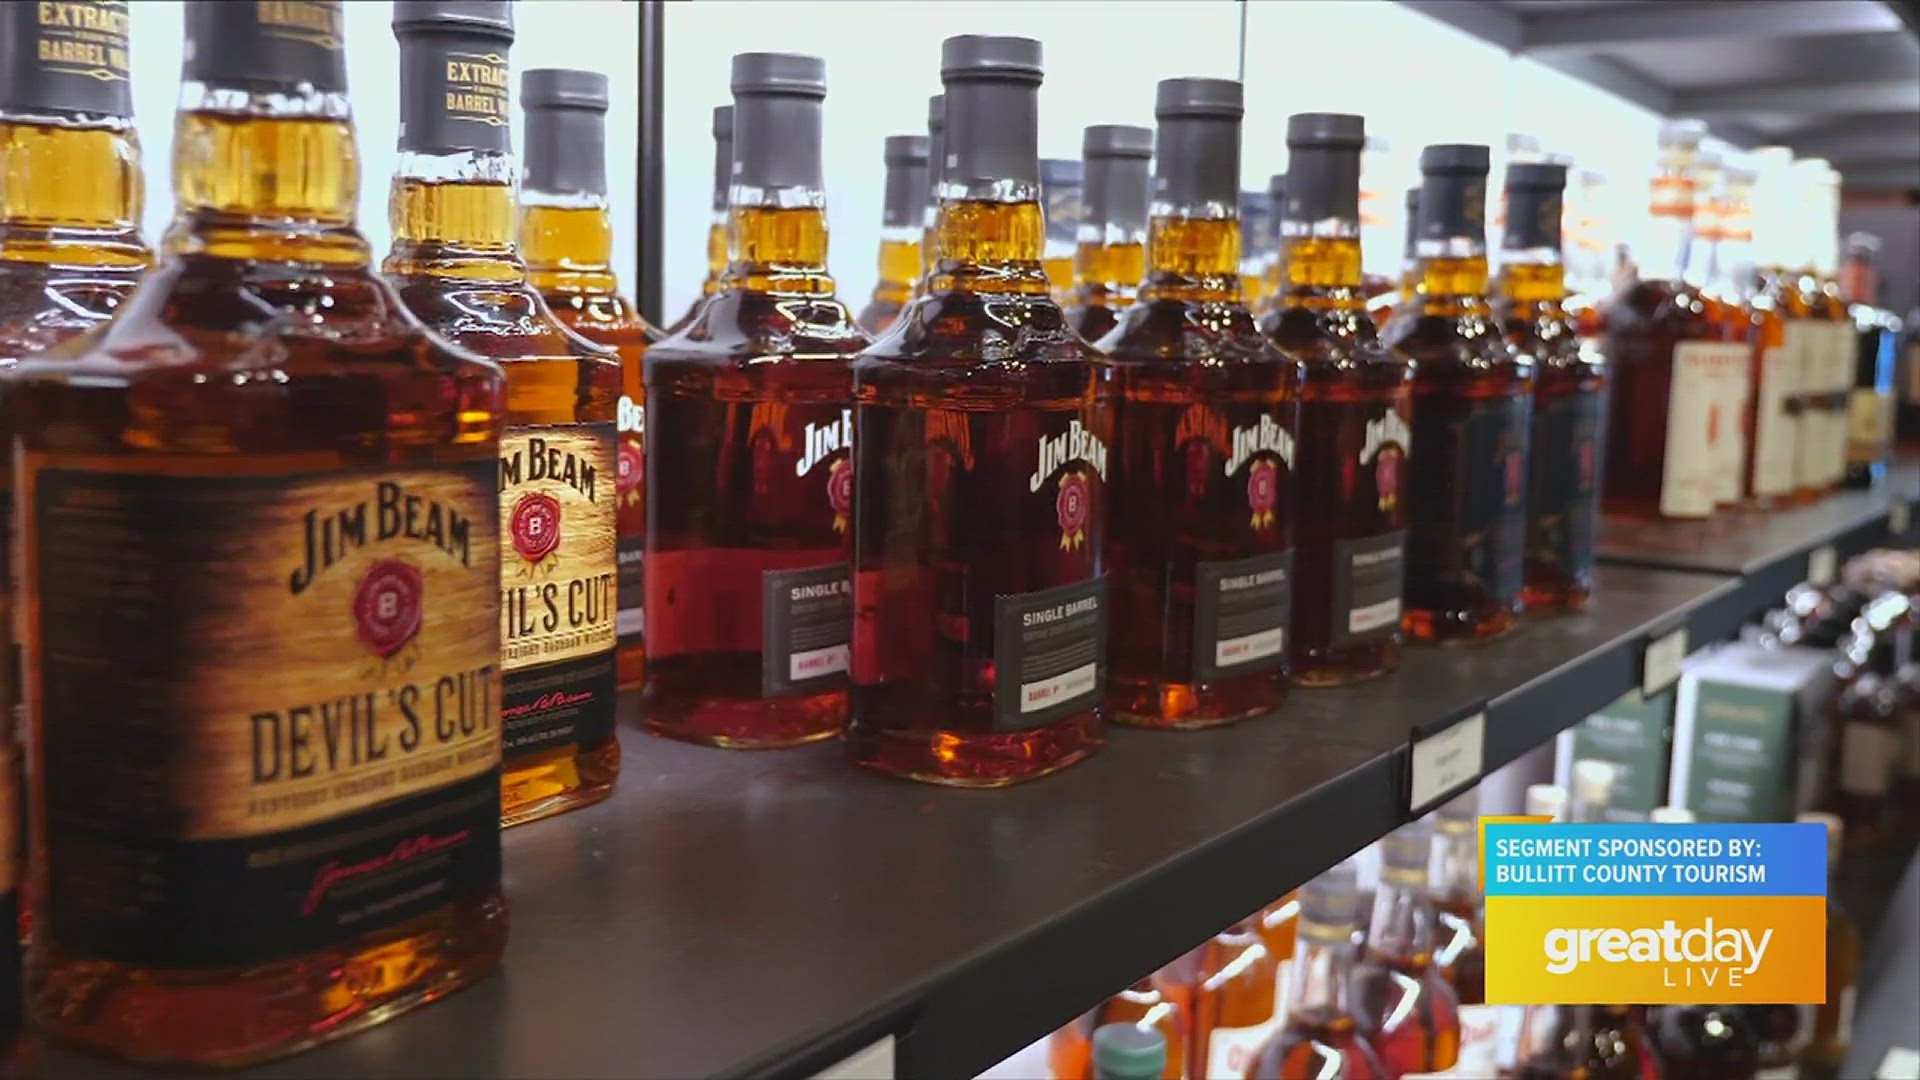 Bullitt County is home to James Distilling Co., the First Family of Bourbon.